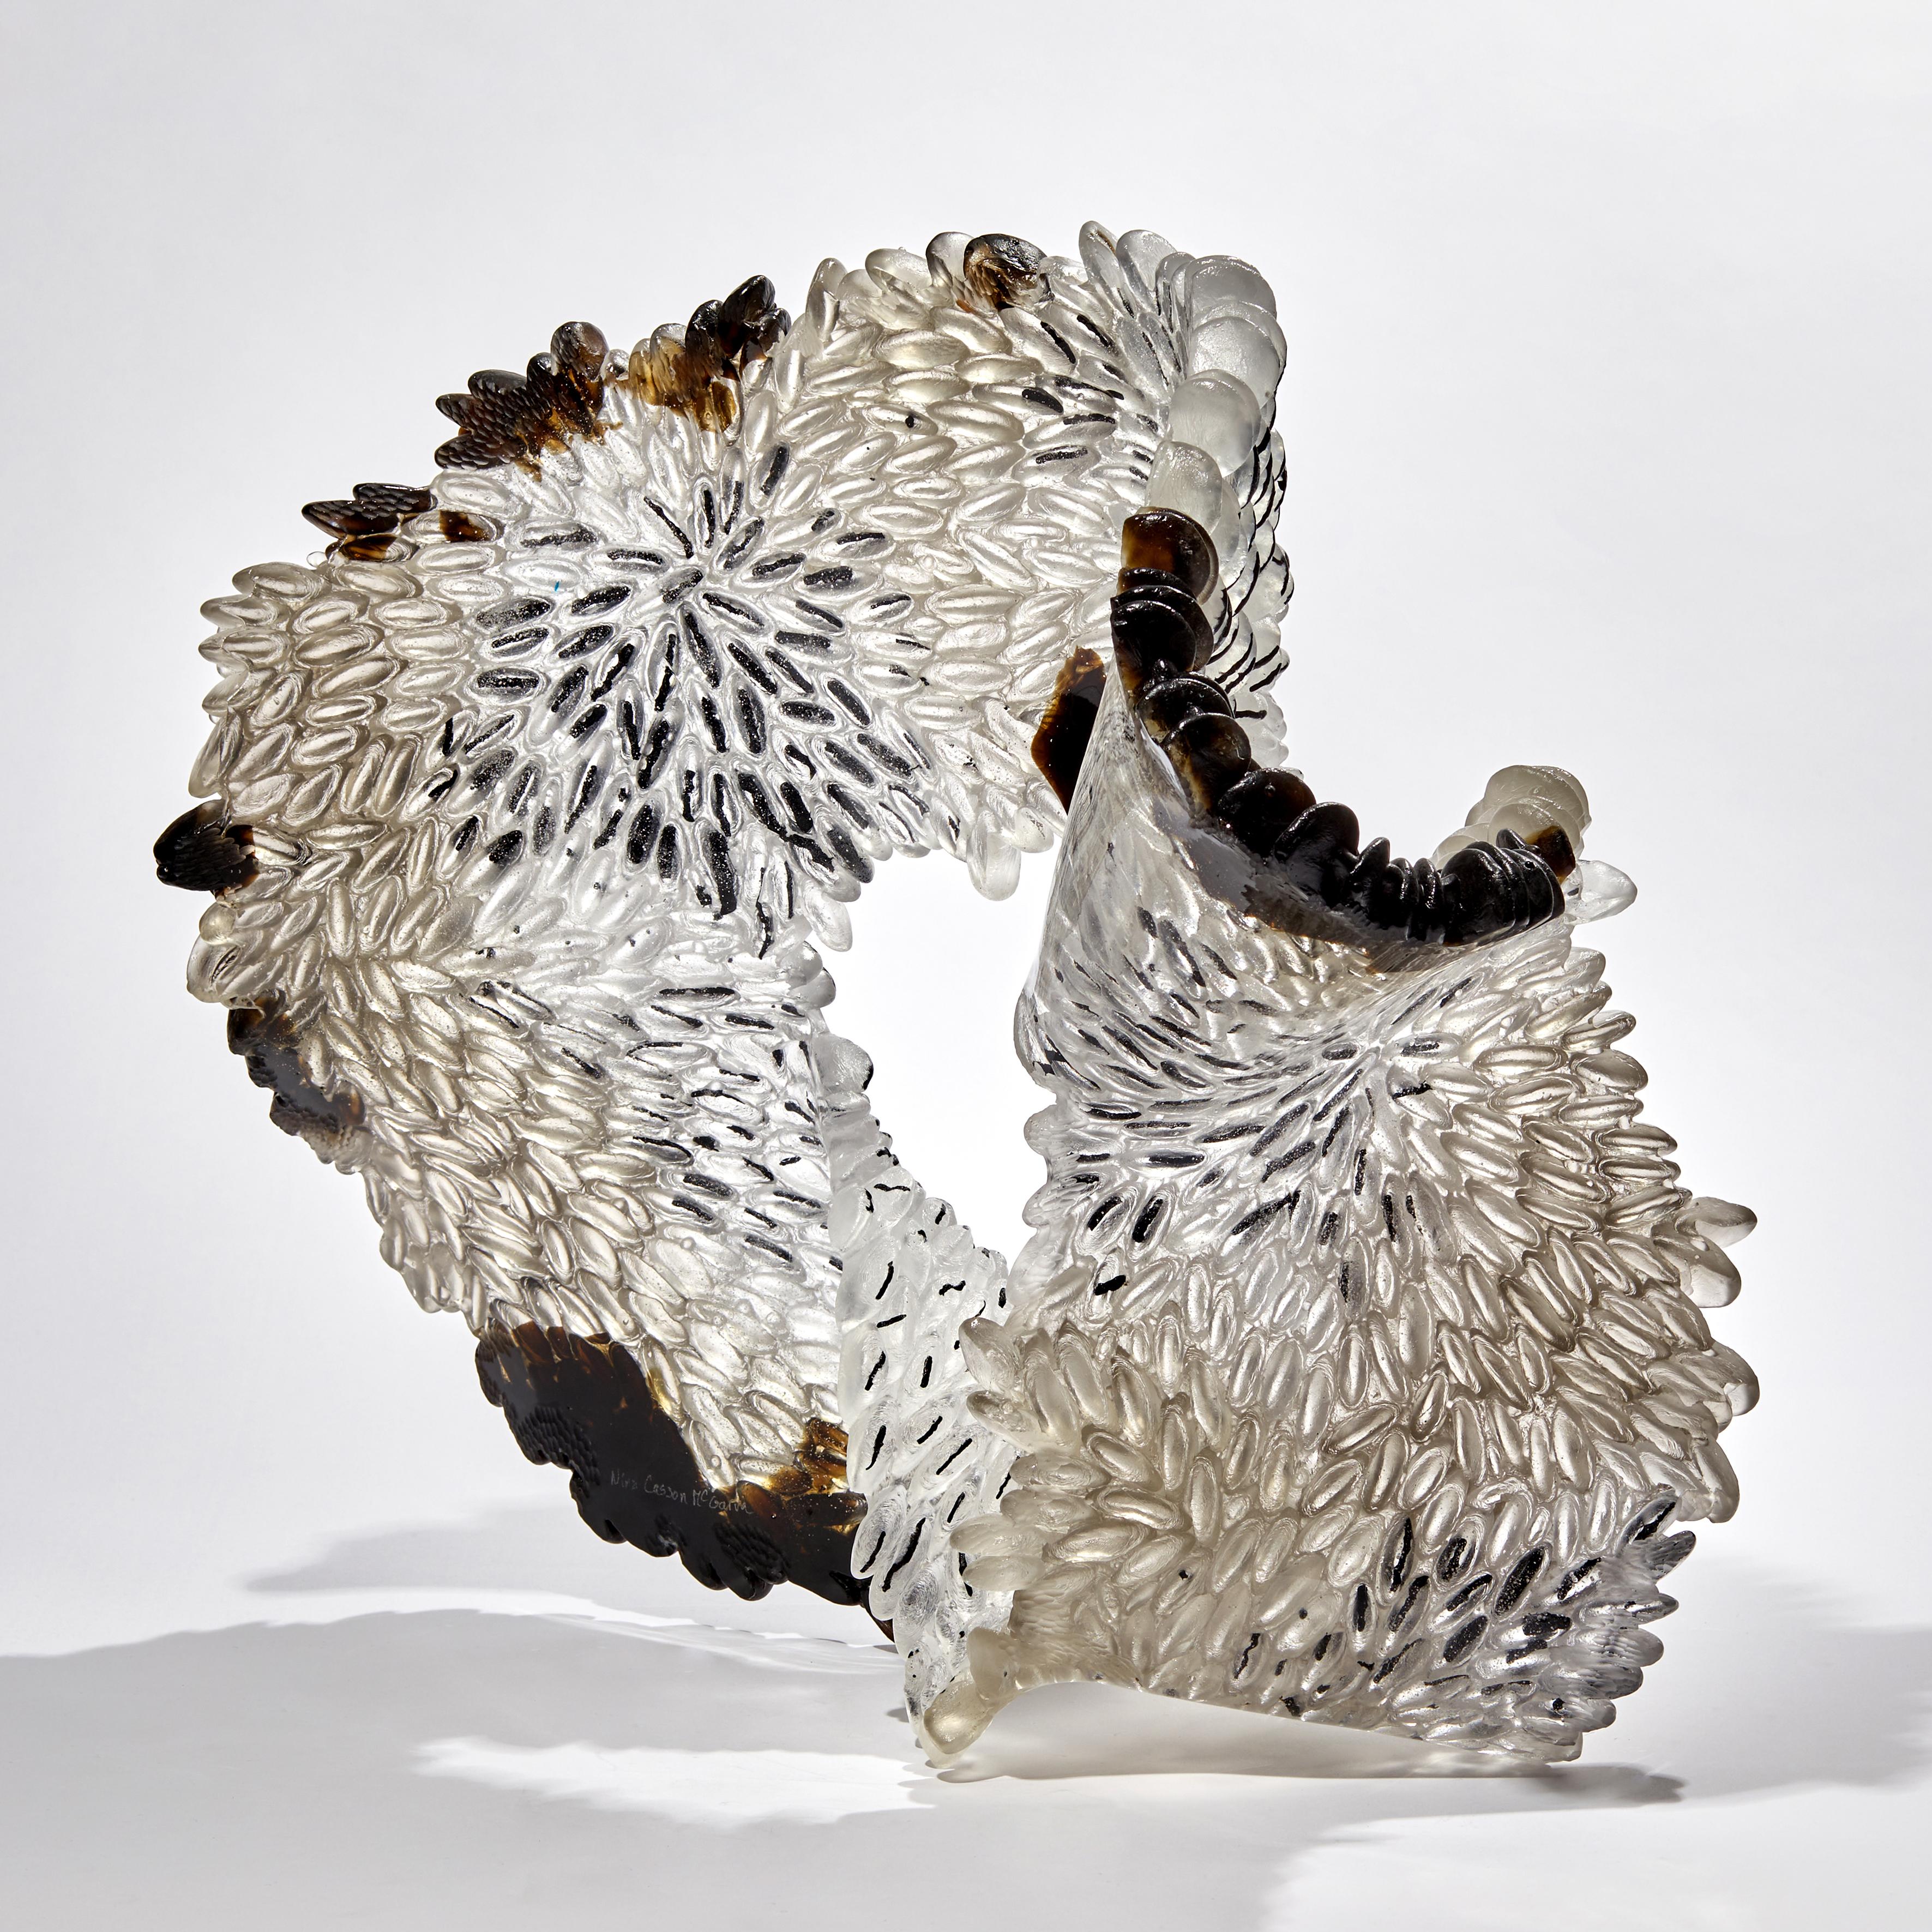 Hand-Crafted Murmur, a Unique Glass Sculpture in Clear, Brown & Black by Nina Casson McGarva